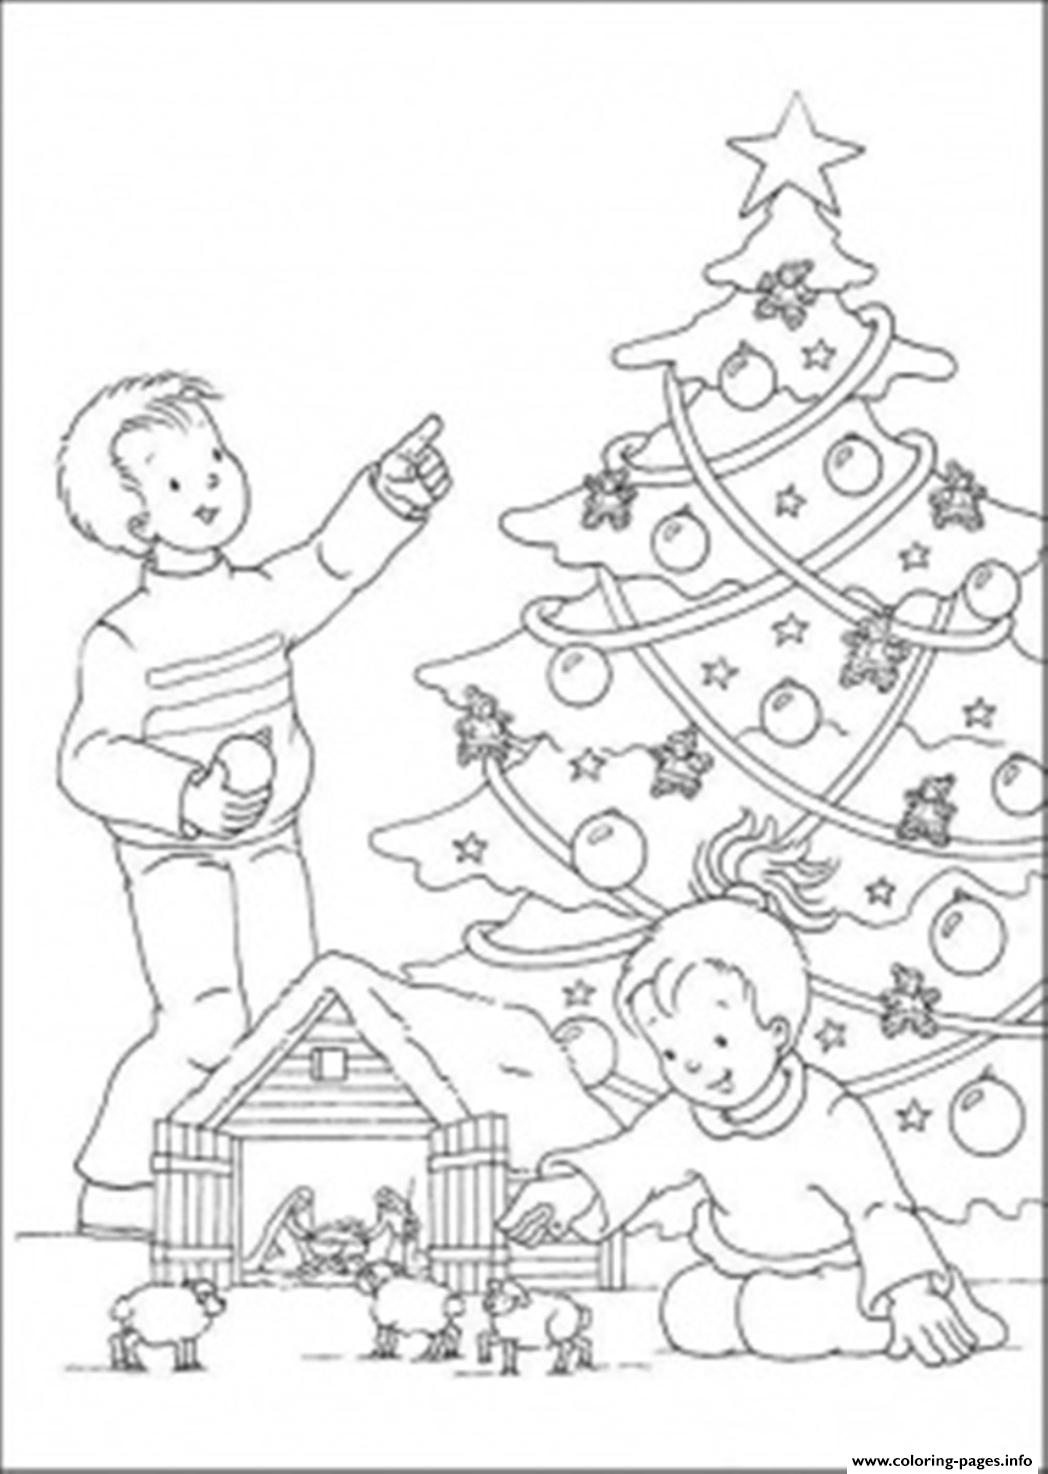 Great Christmas Tree S For Kids Printable5c37 coloring